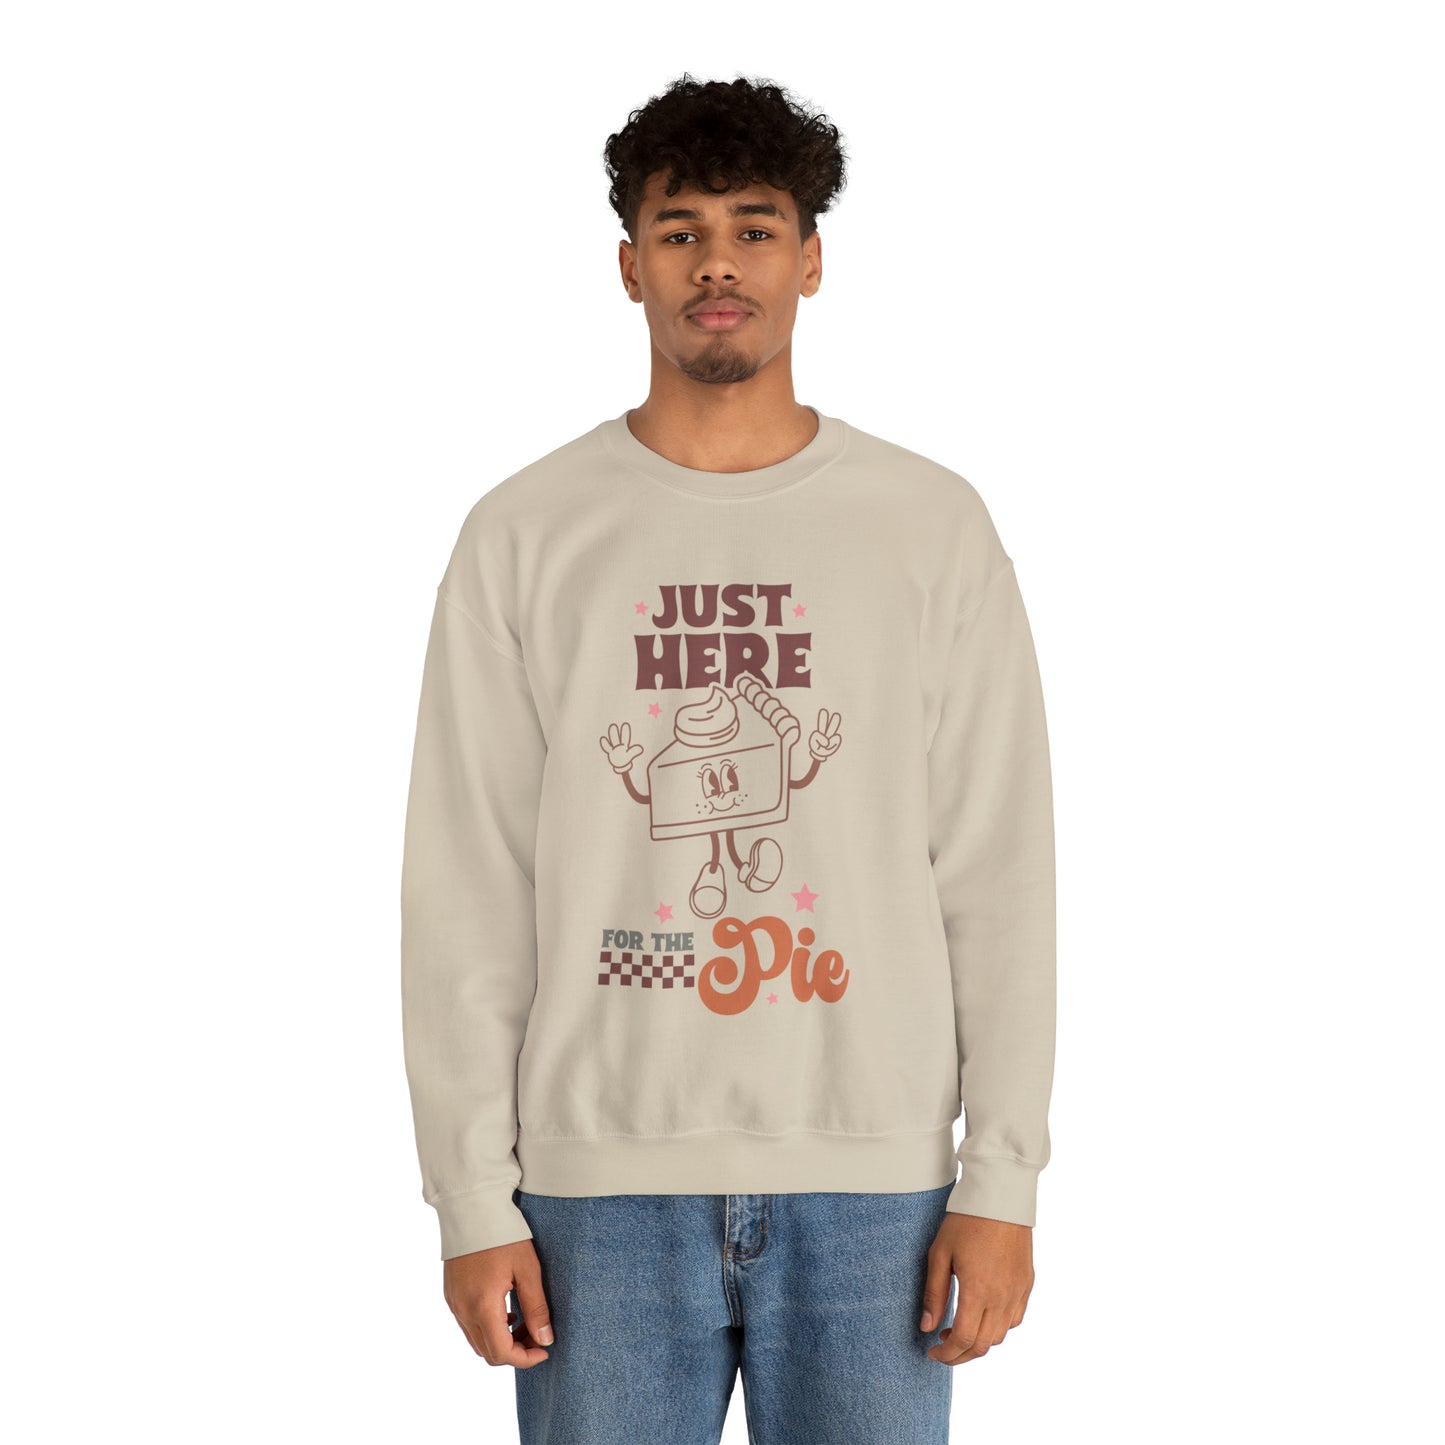 Just Here For The Pie | Unisex Thanksgiving Crewneck Sweatshirt | Thanksgiving Funny Sweatshirt